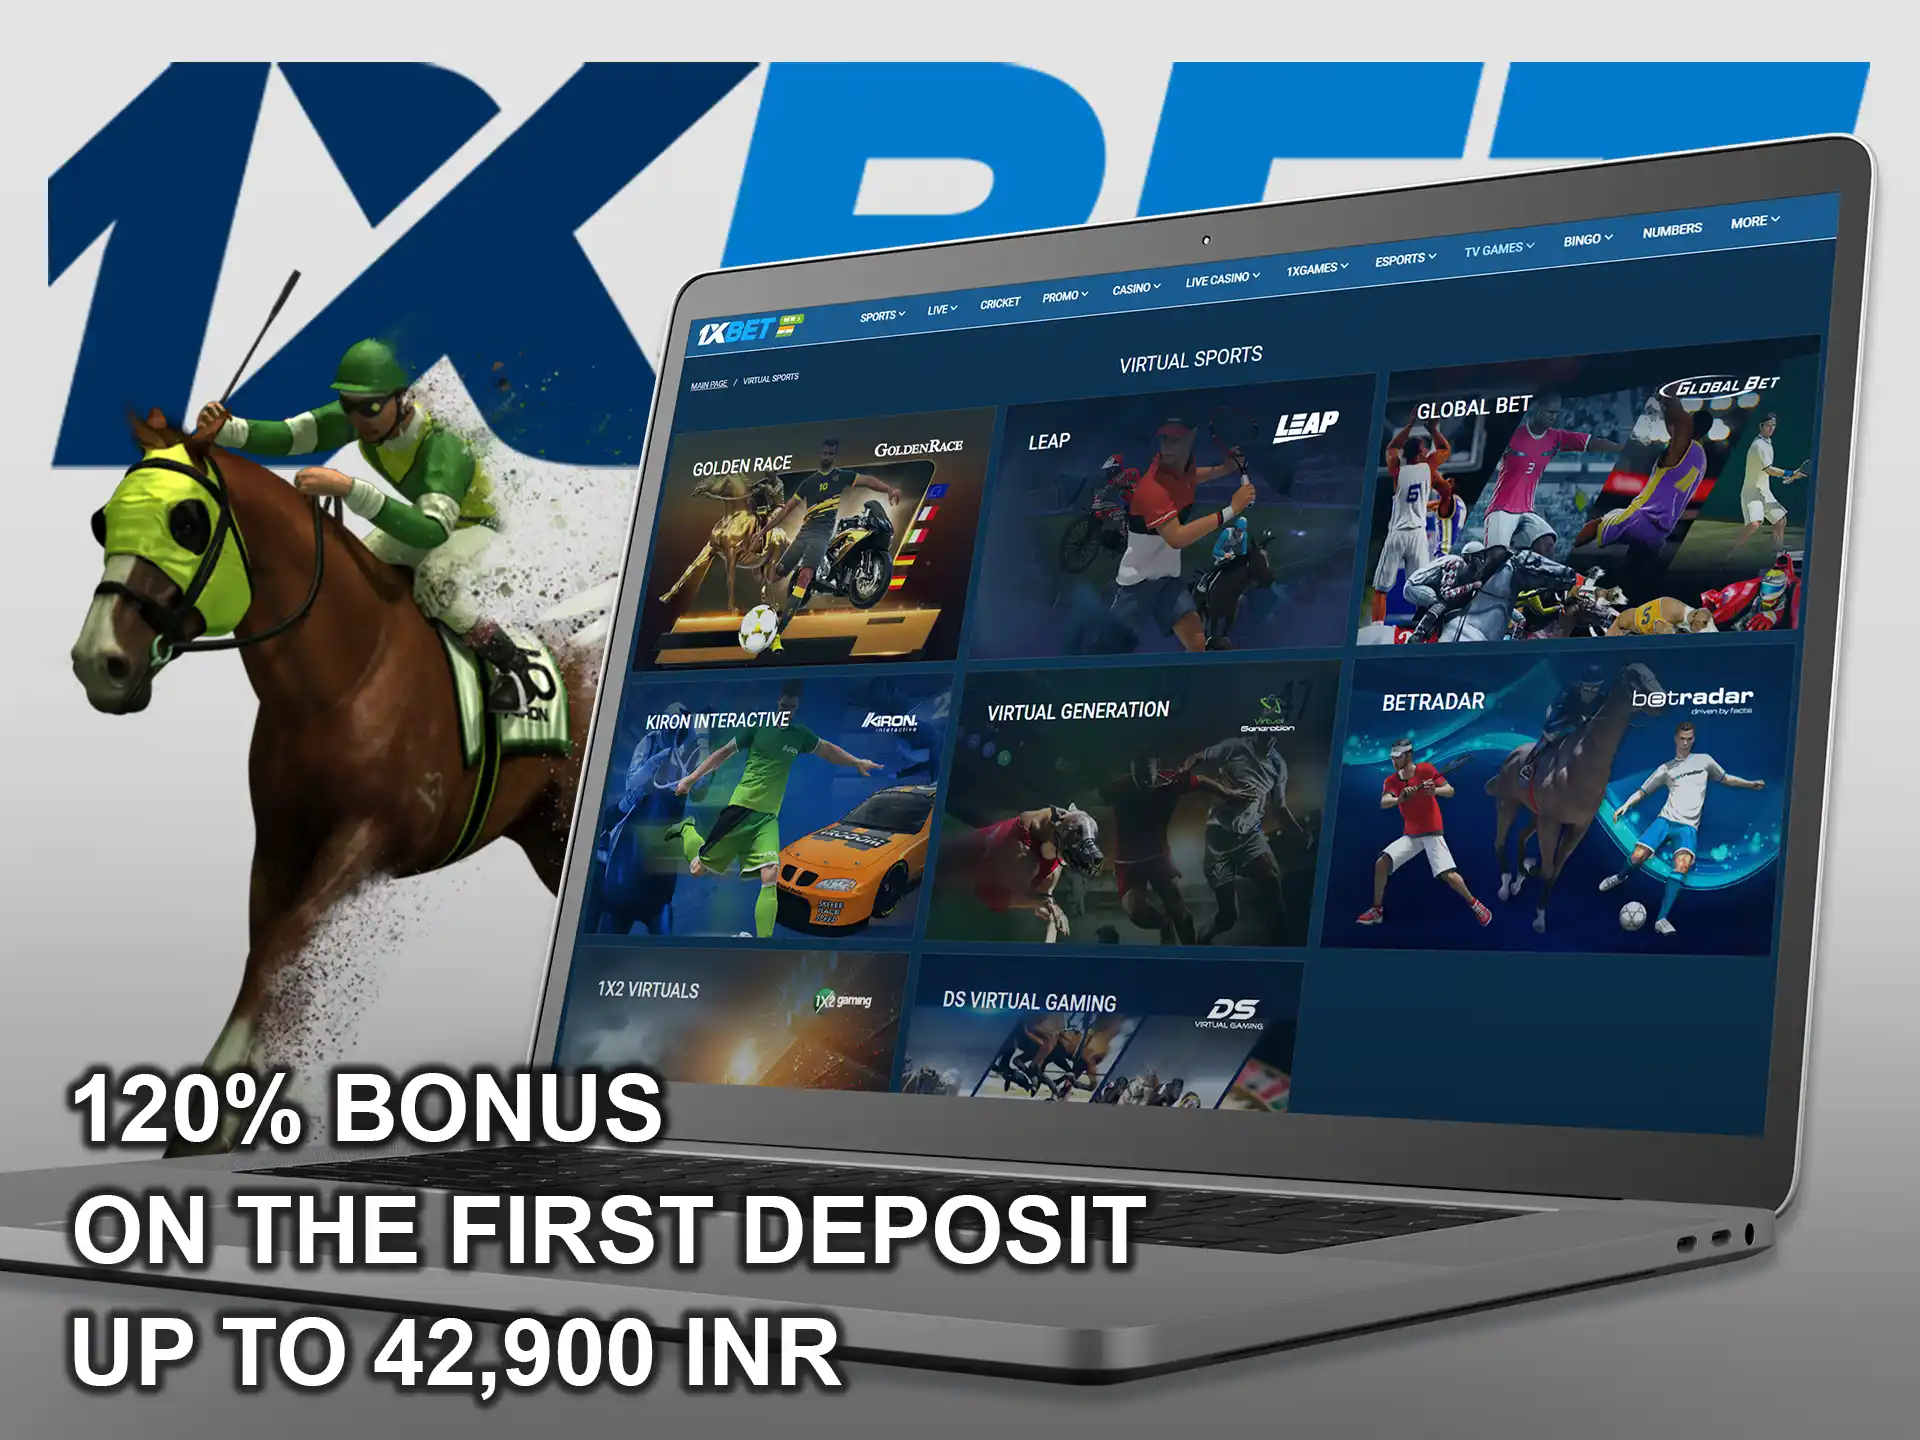 Register, make your first deposit and get profitable bonuses from 1xBet.